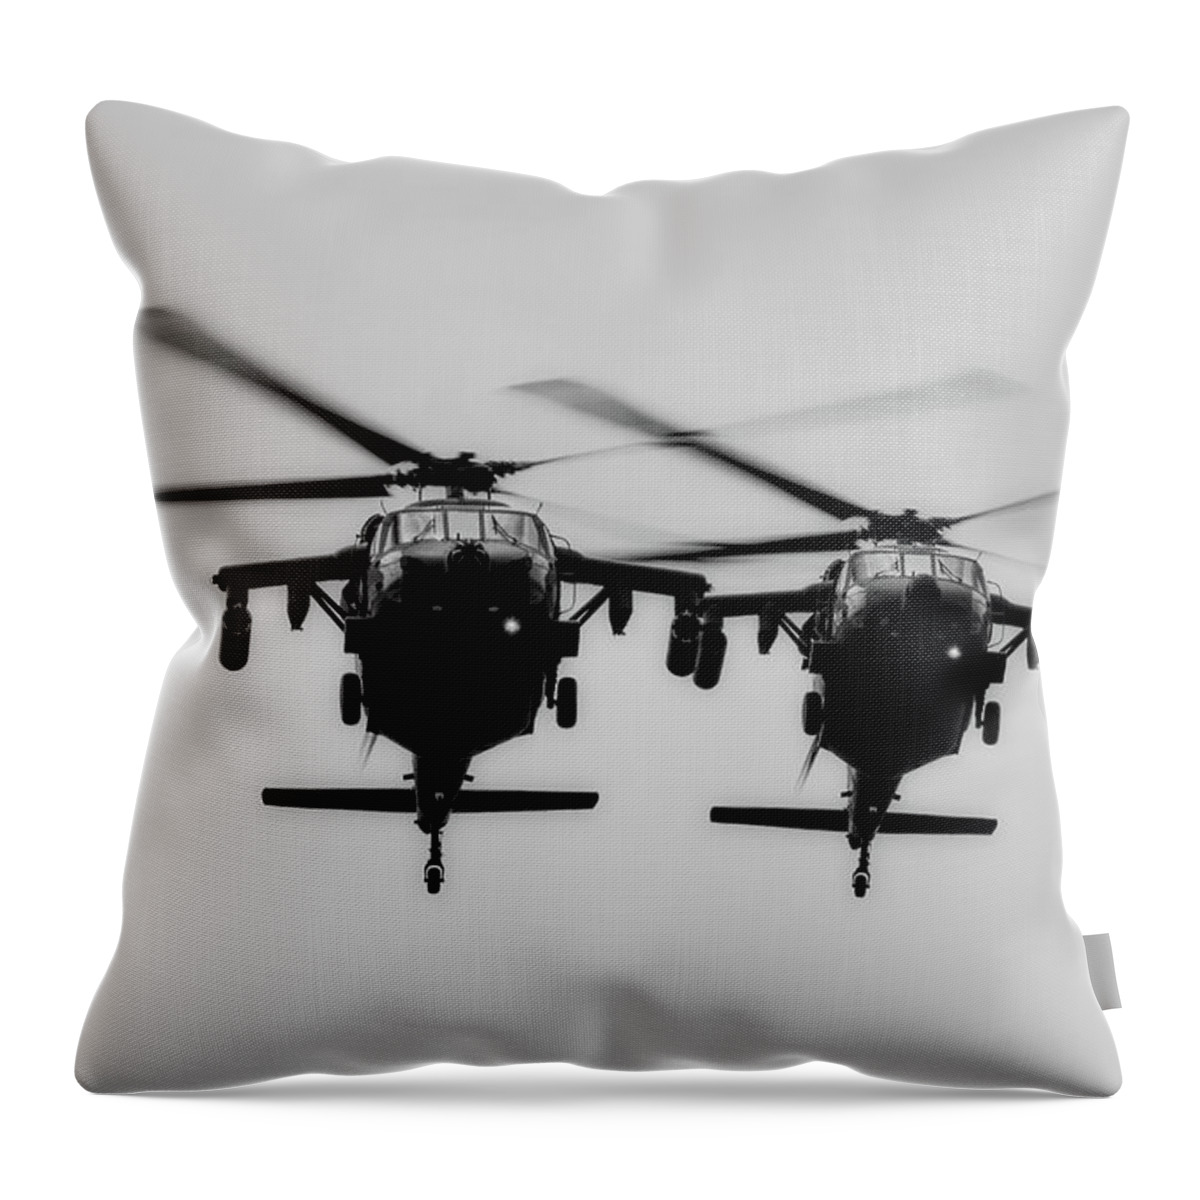 Uh-60 Black Hawk Throw Pillow featuring the photograph Black Hawks On Patrol #1 by Mountain Dreams